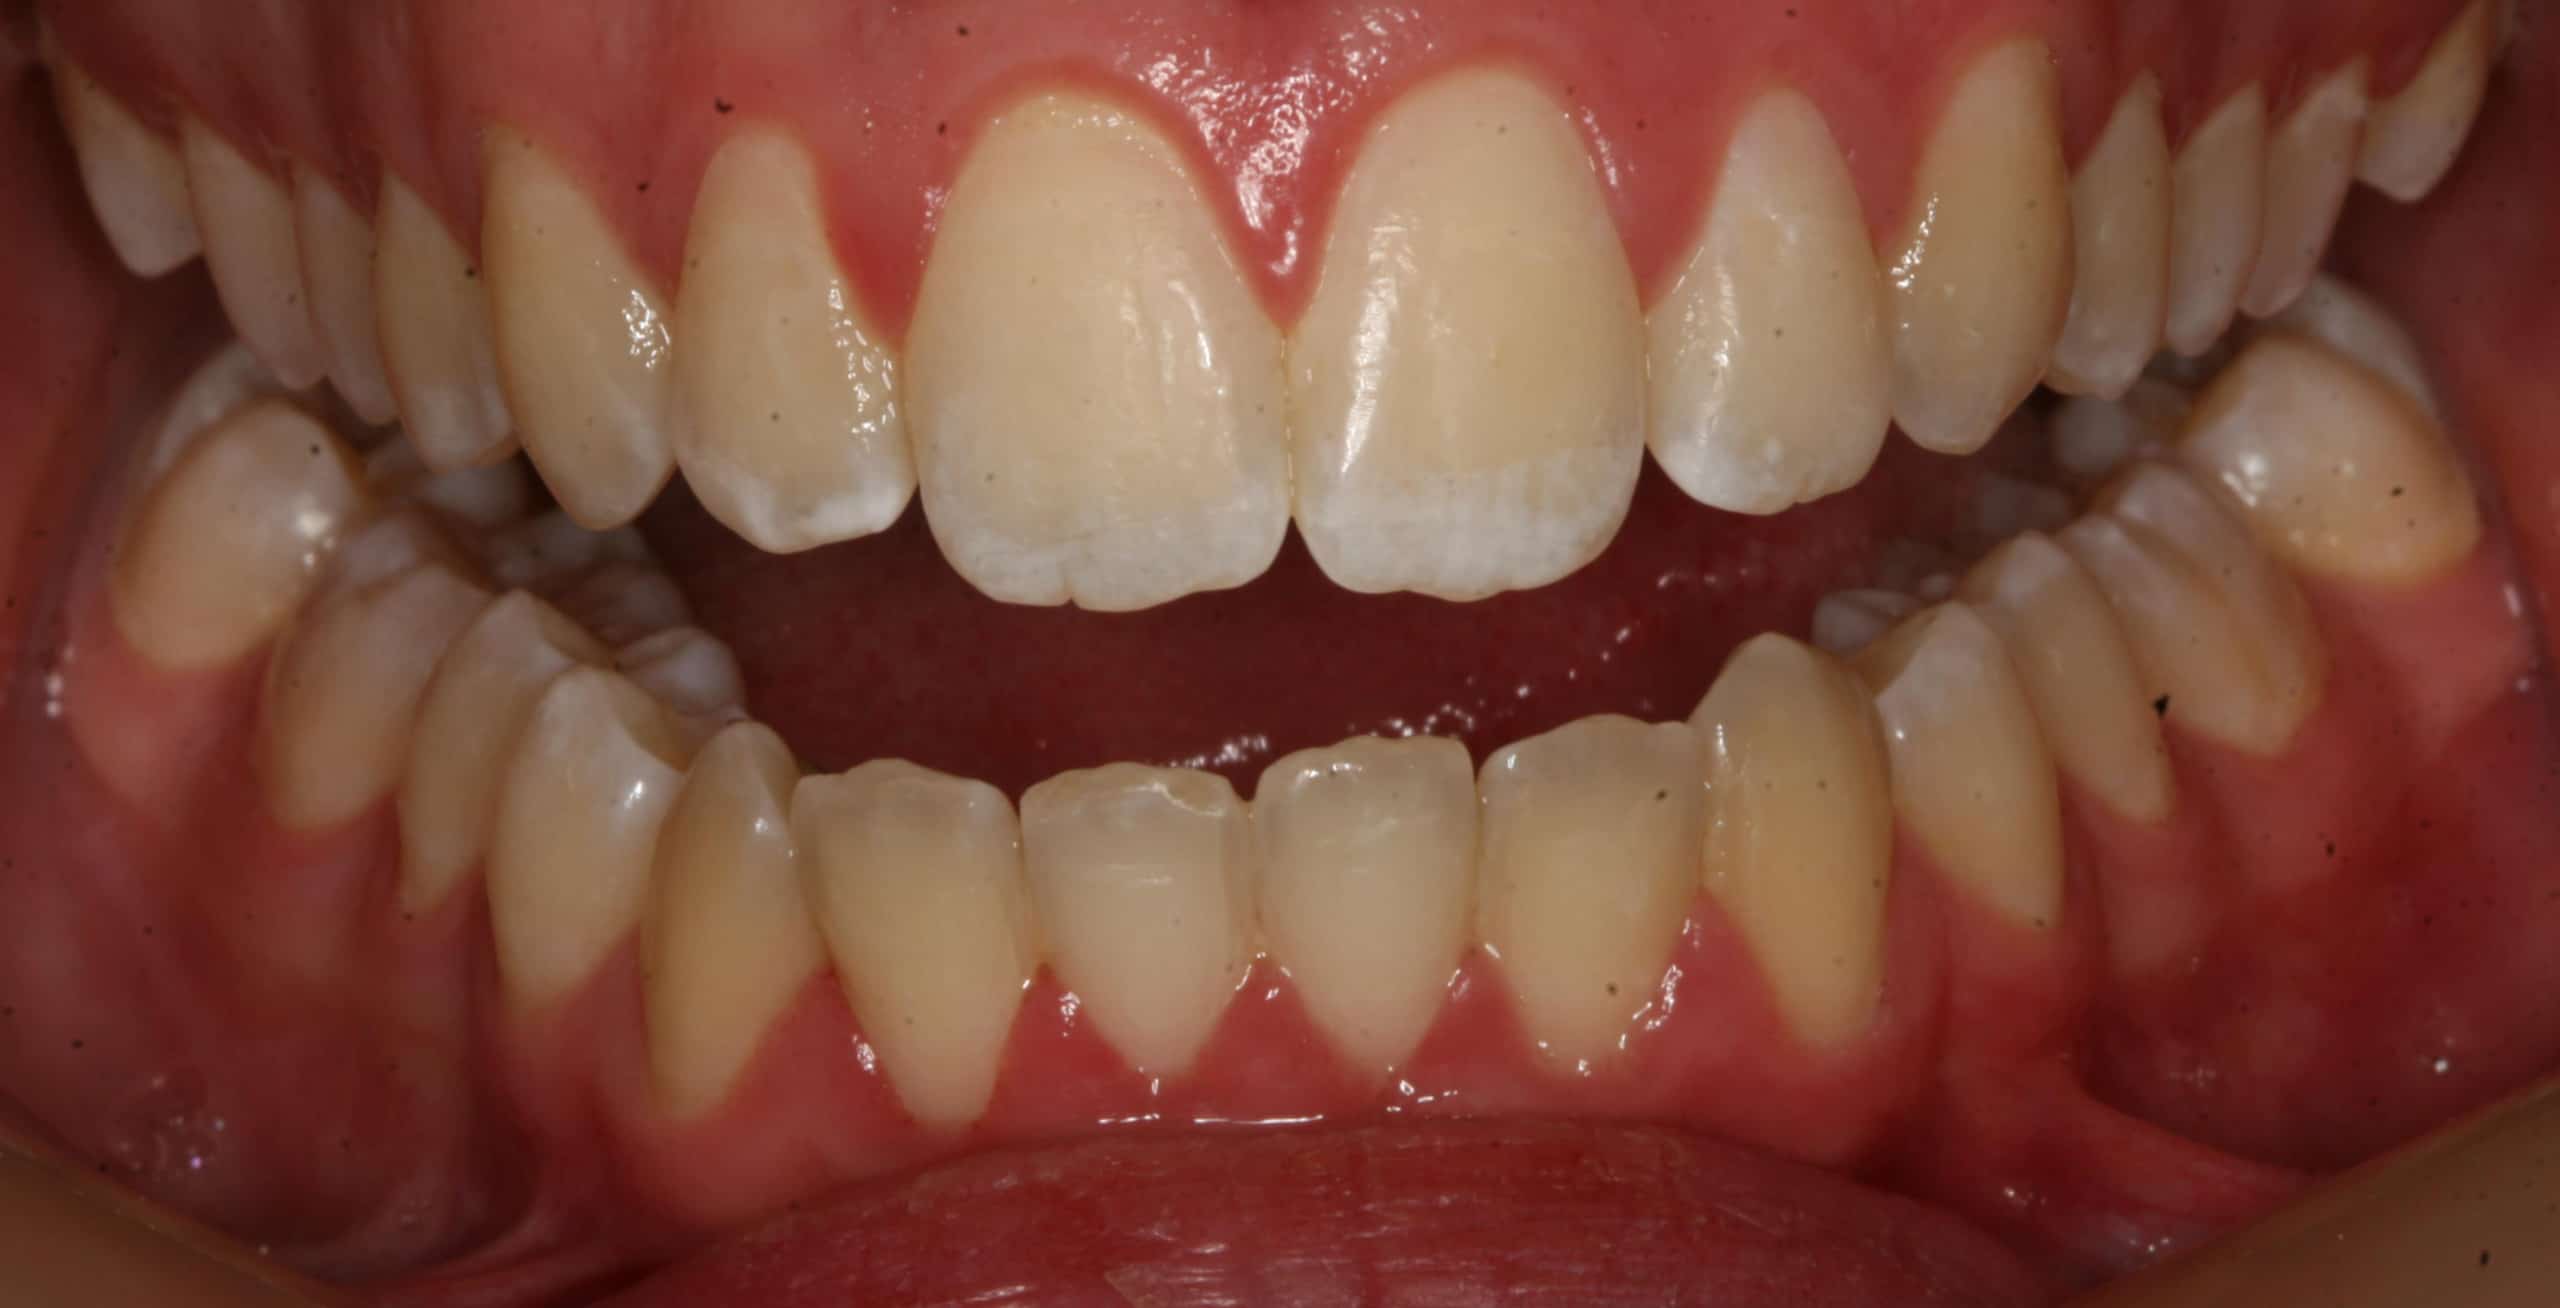 Closeup view of a smile before dental work